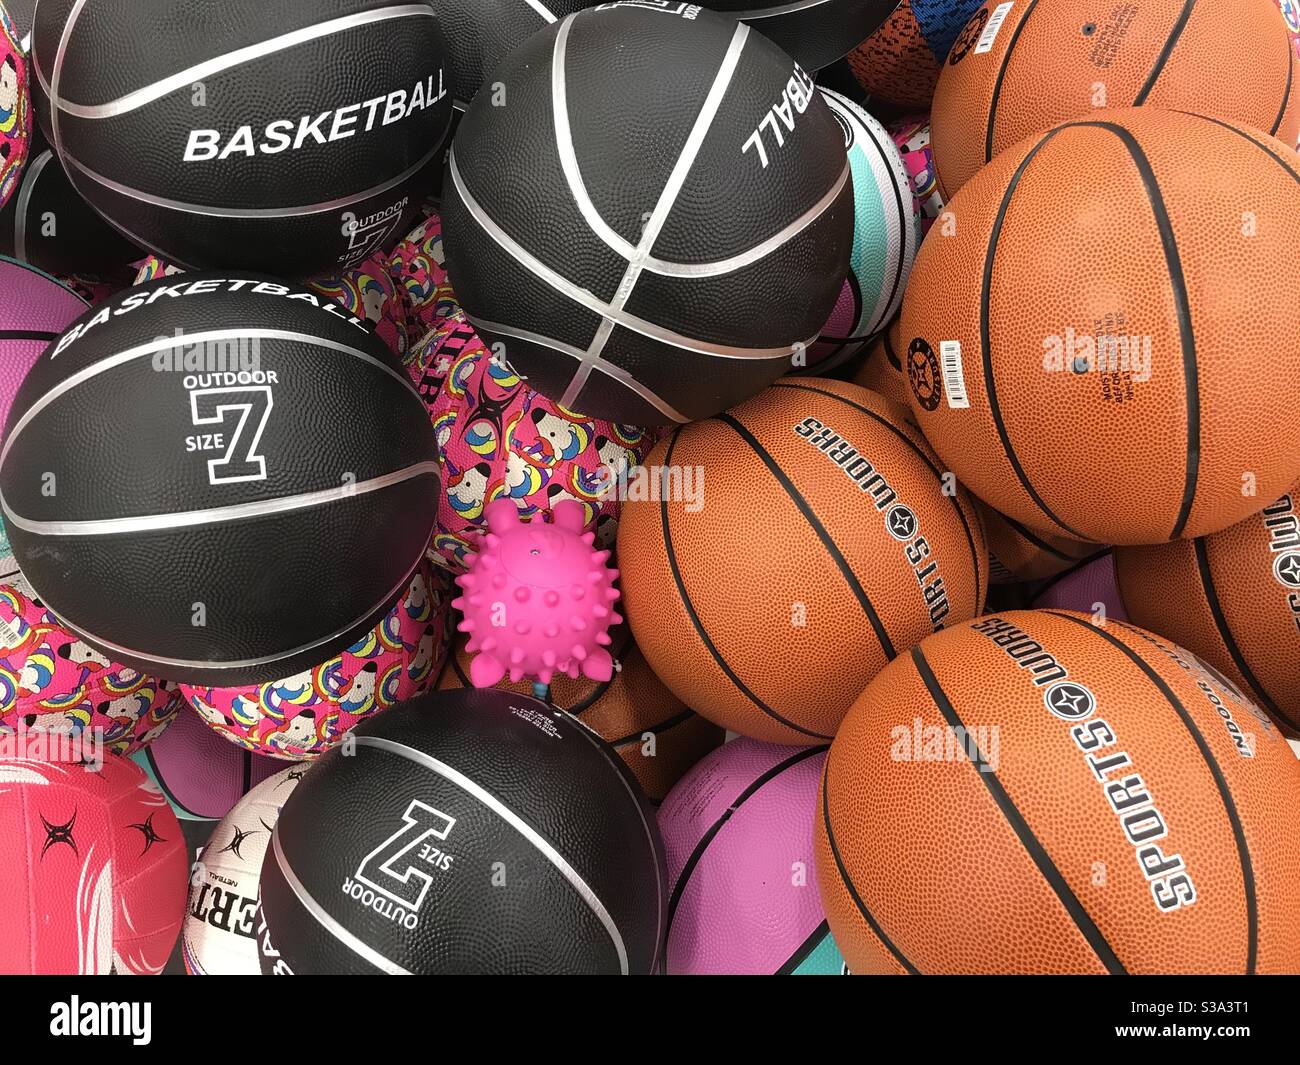 Basketballs and other balls for sale in Kmart store, Chatswood Chase shopping centre, Chatswood, Sydney, NSW, Australia Stock Photo